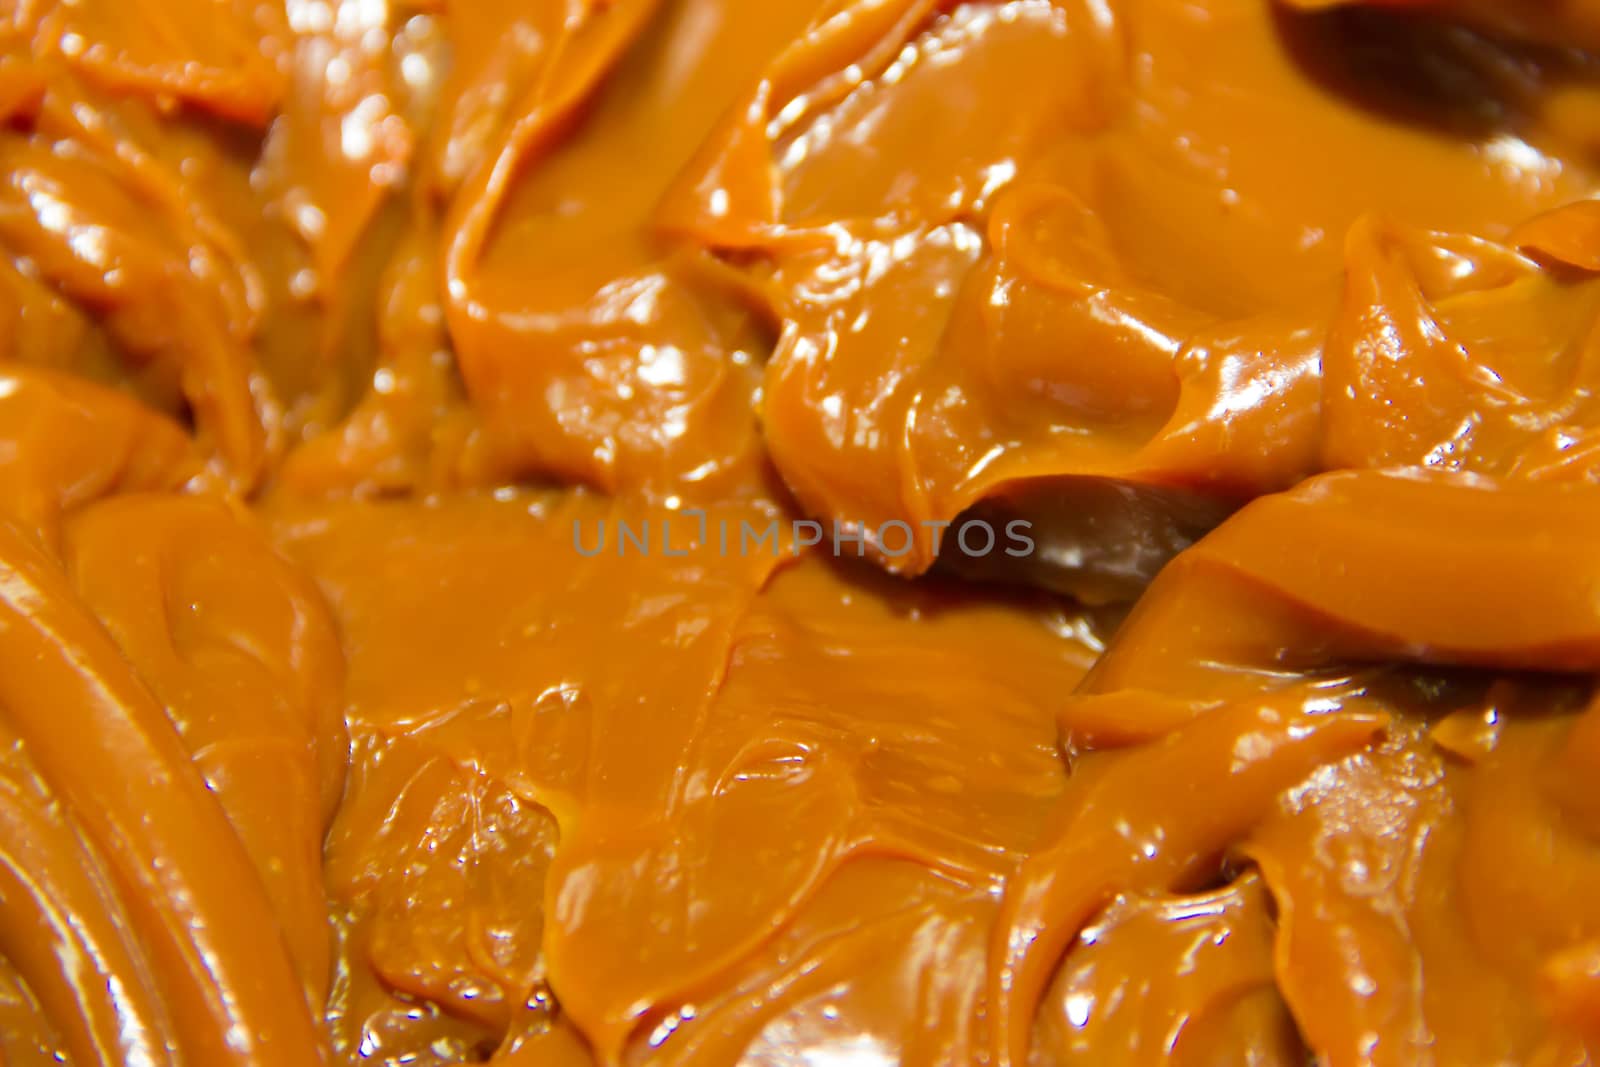 textured background of Argentinean dulce de leche